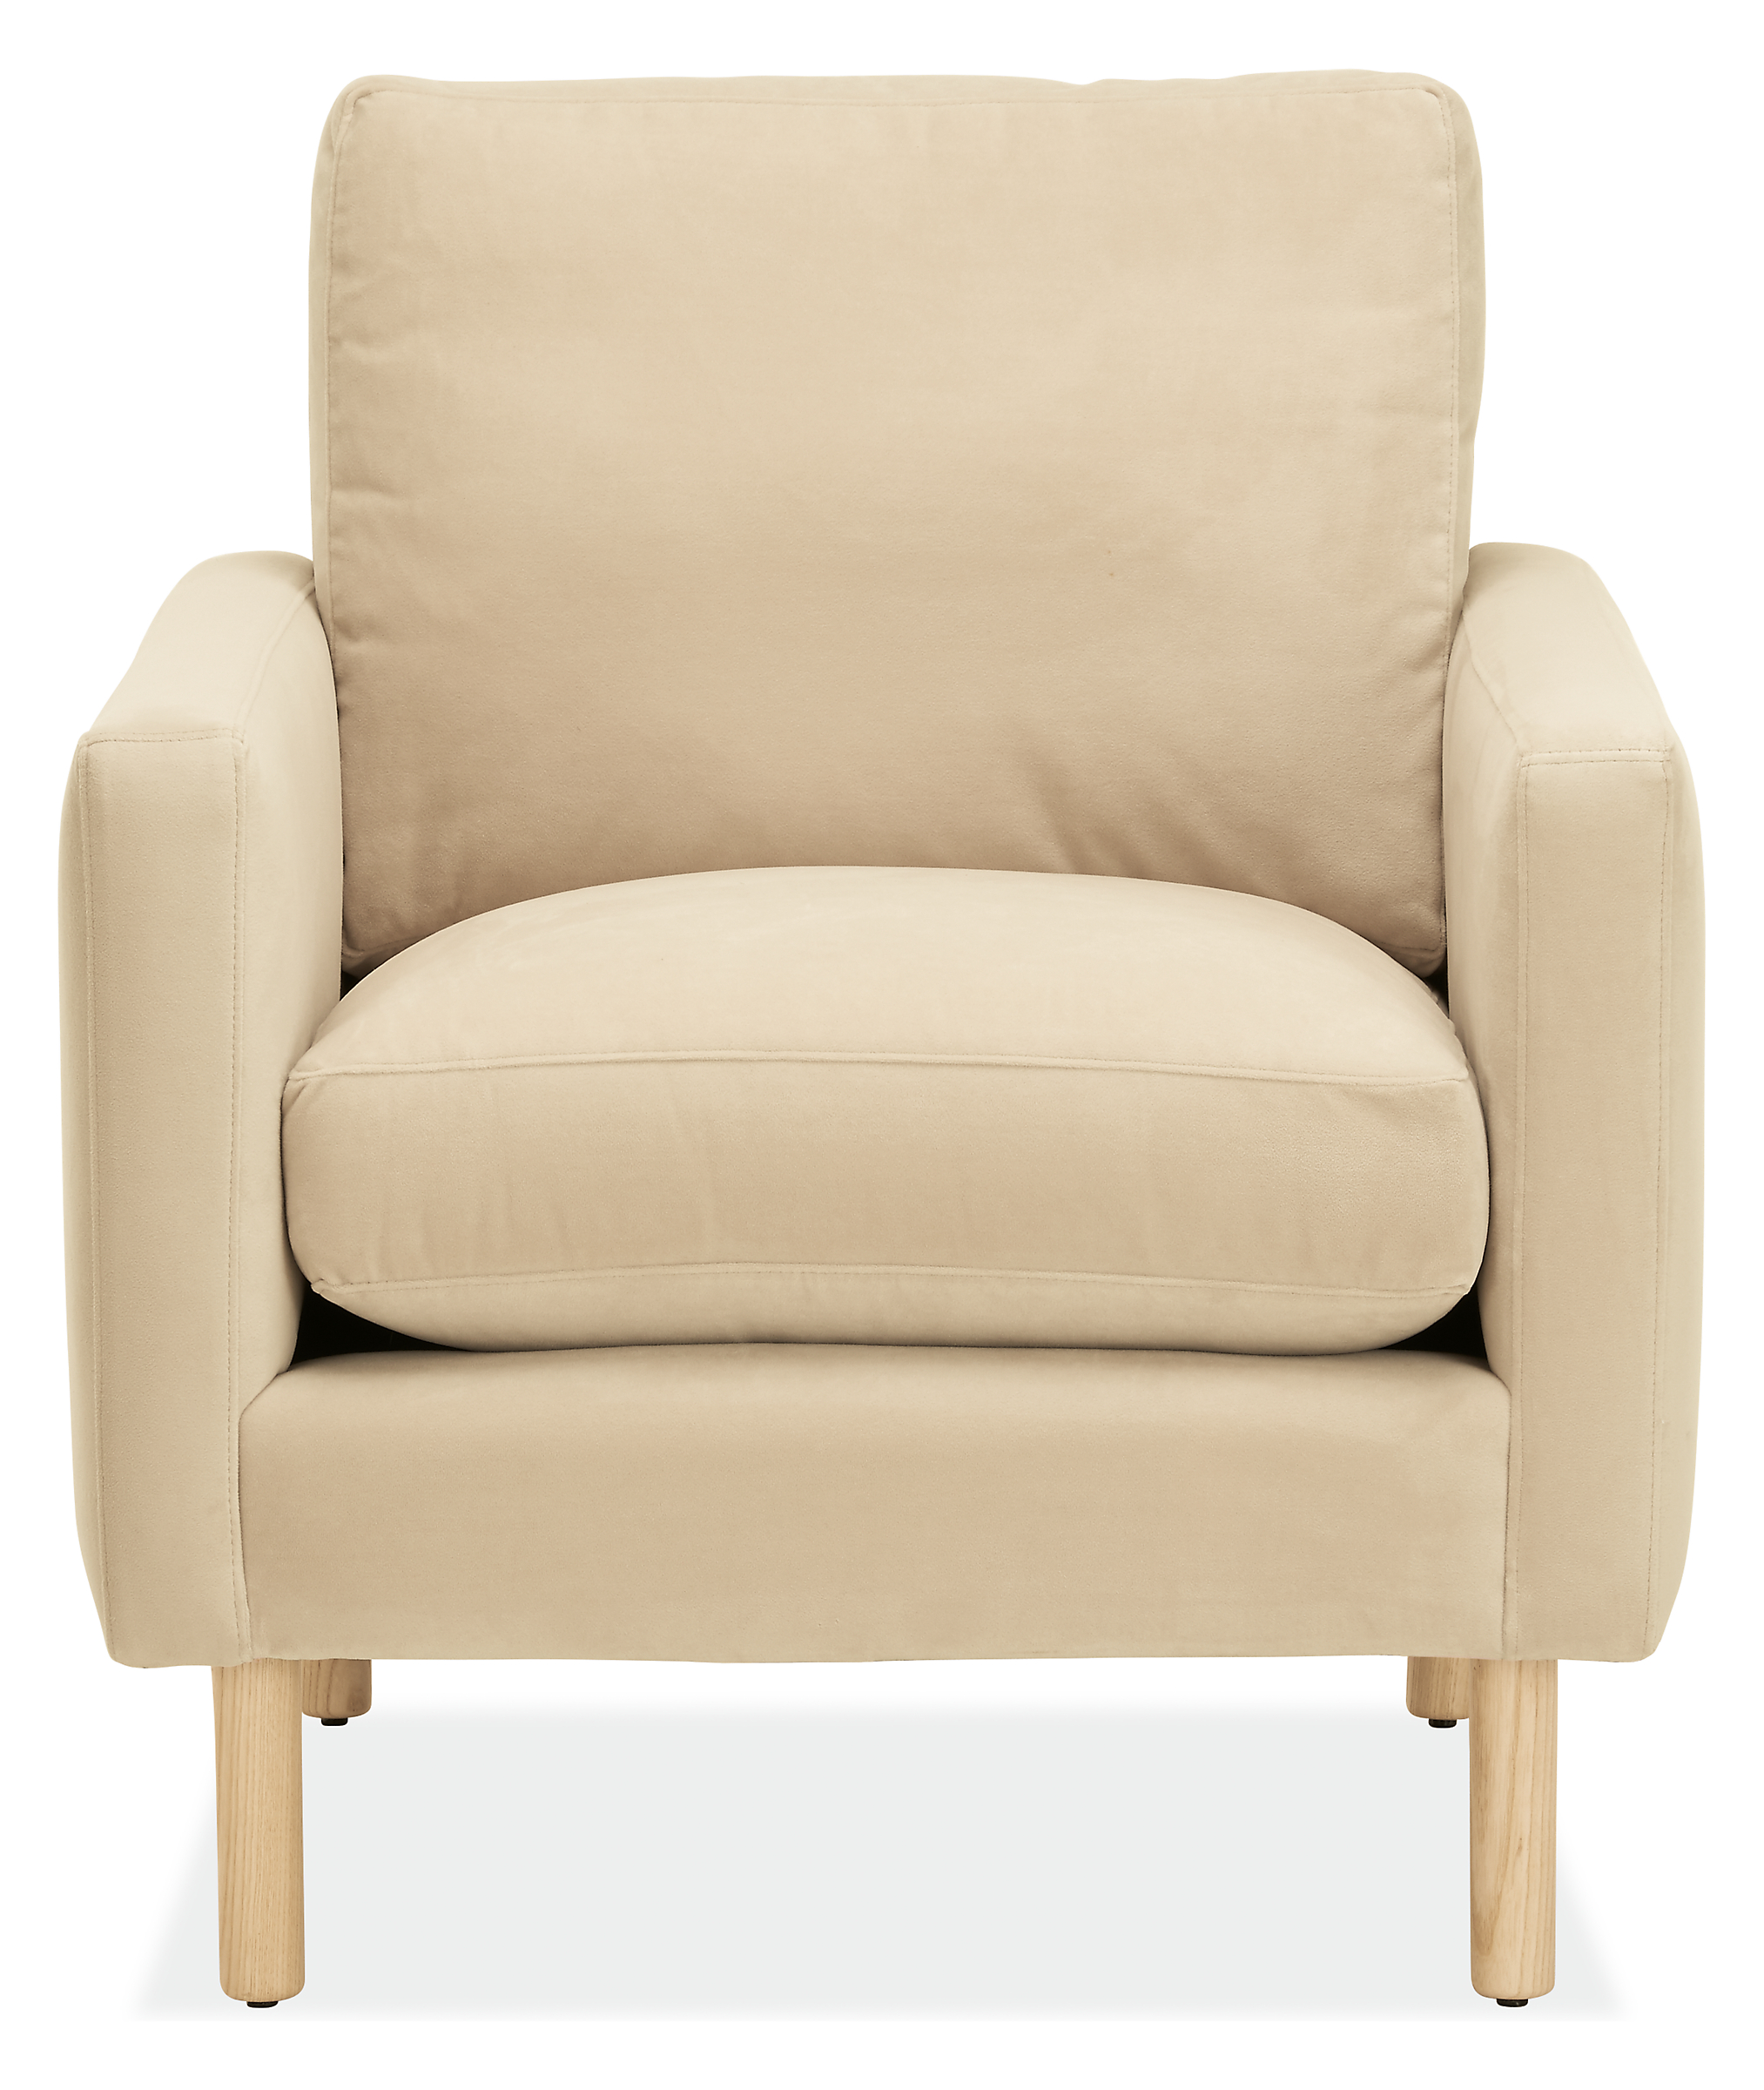 Front view of Jasper 30" Chair in View Fabric with Wood Legs.